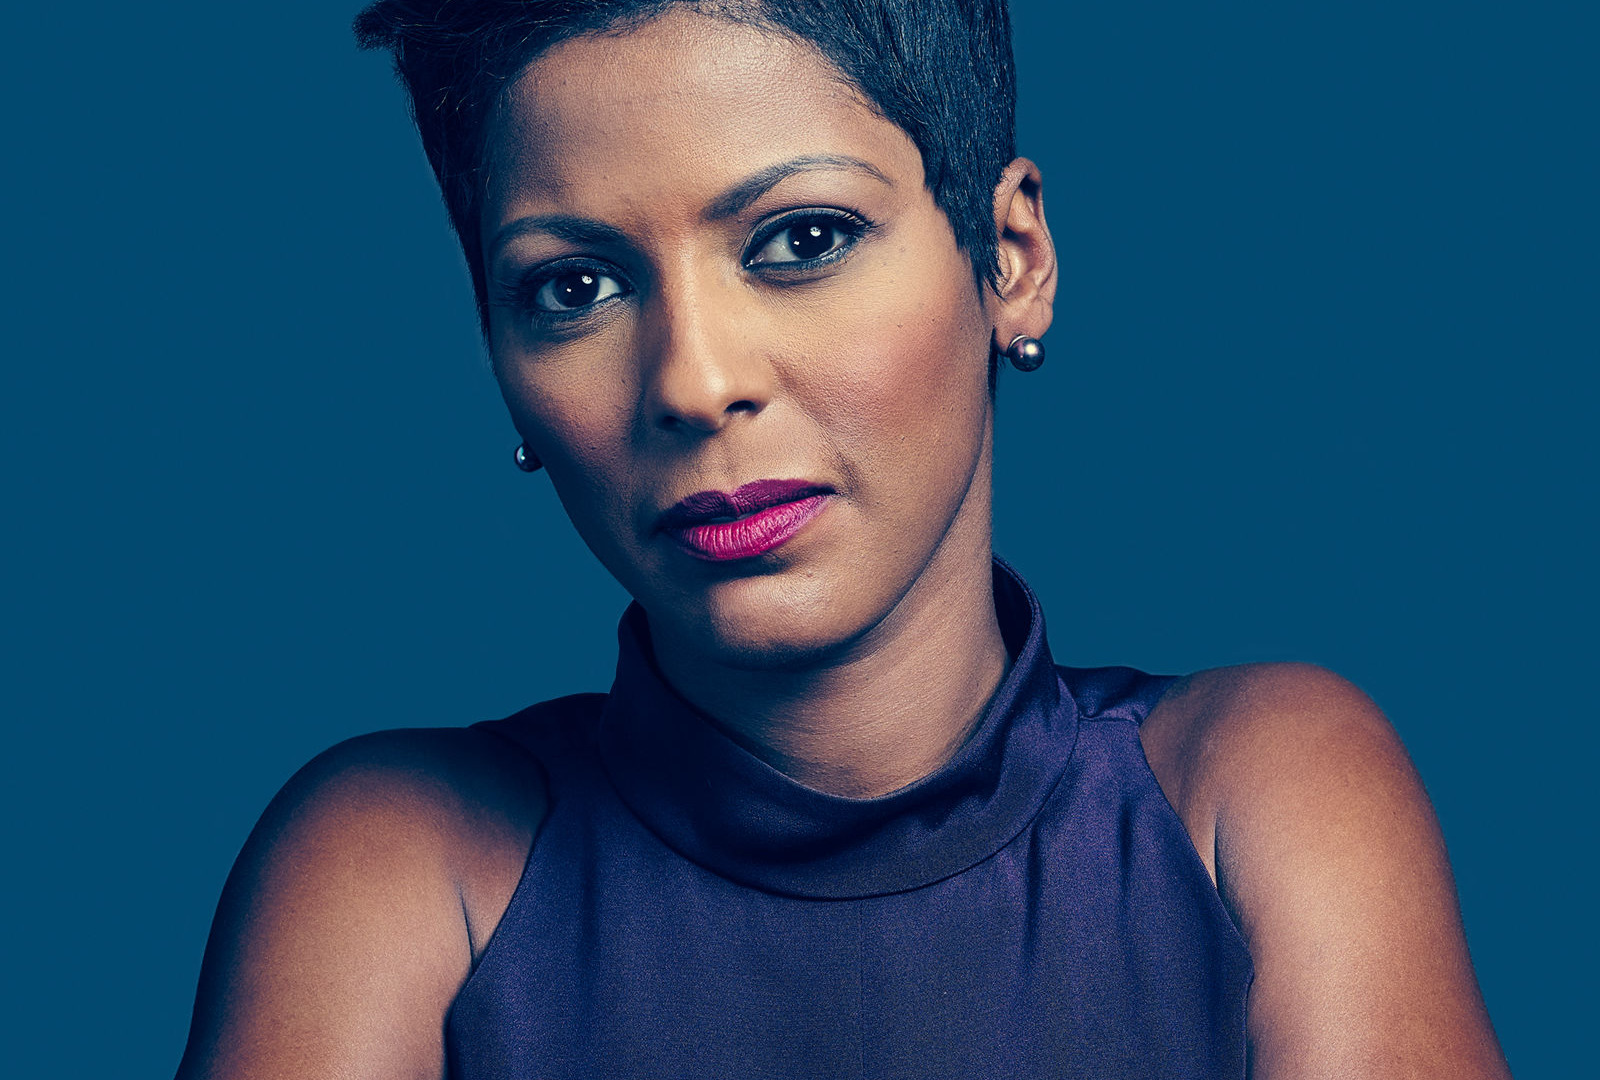 Show Deadline: Crime with Tamron Hall